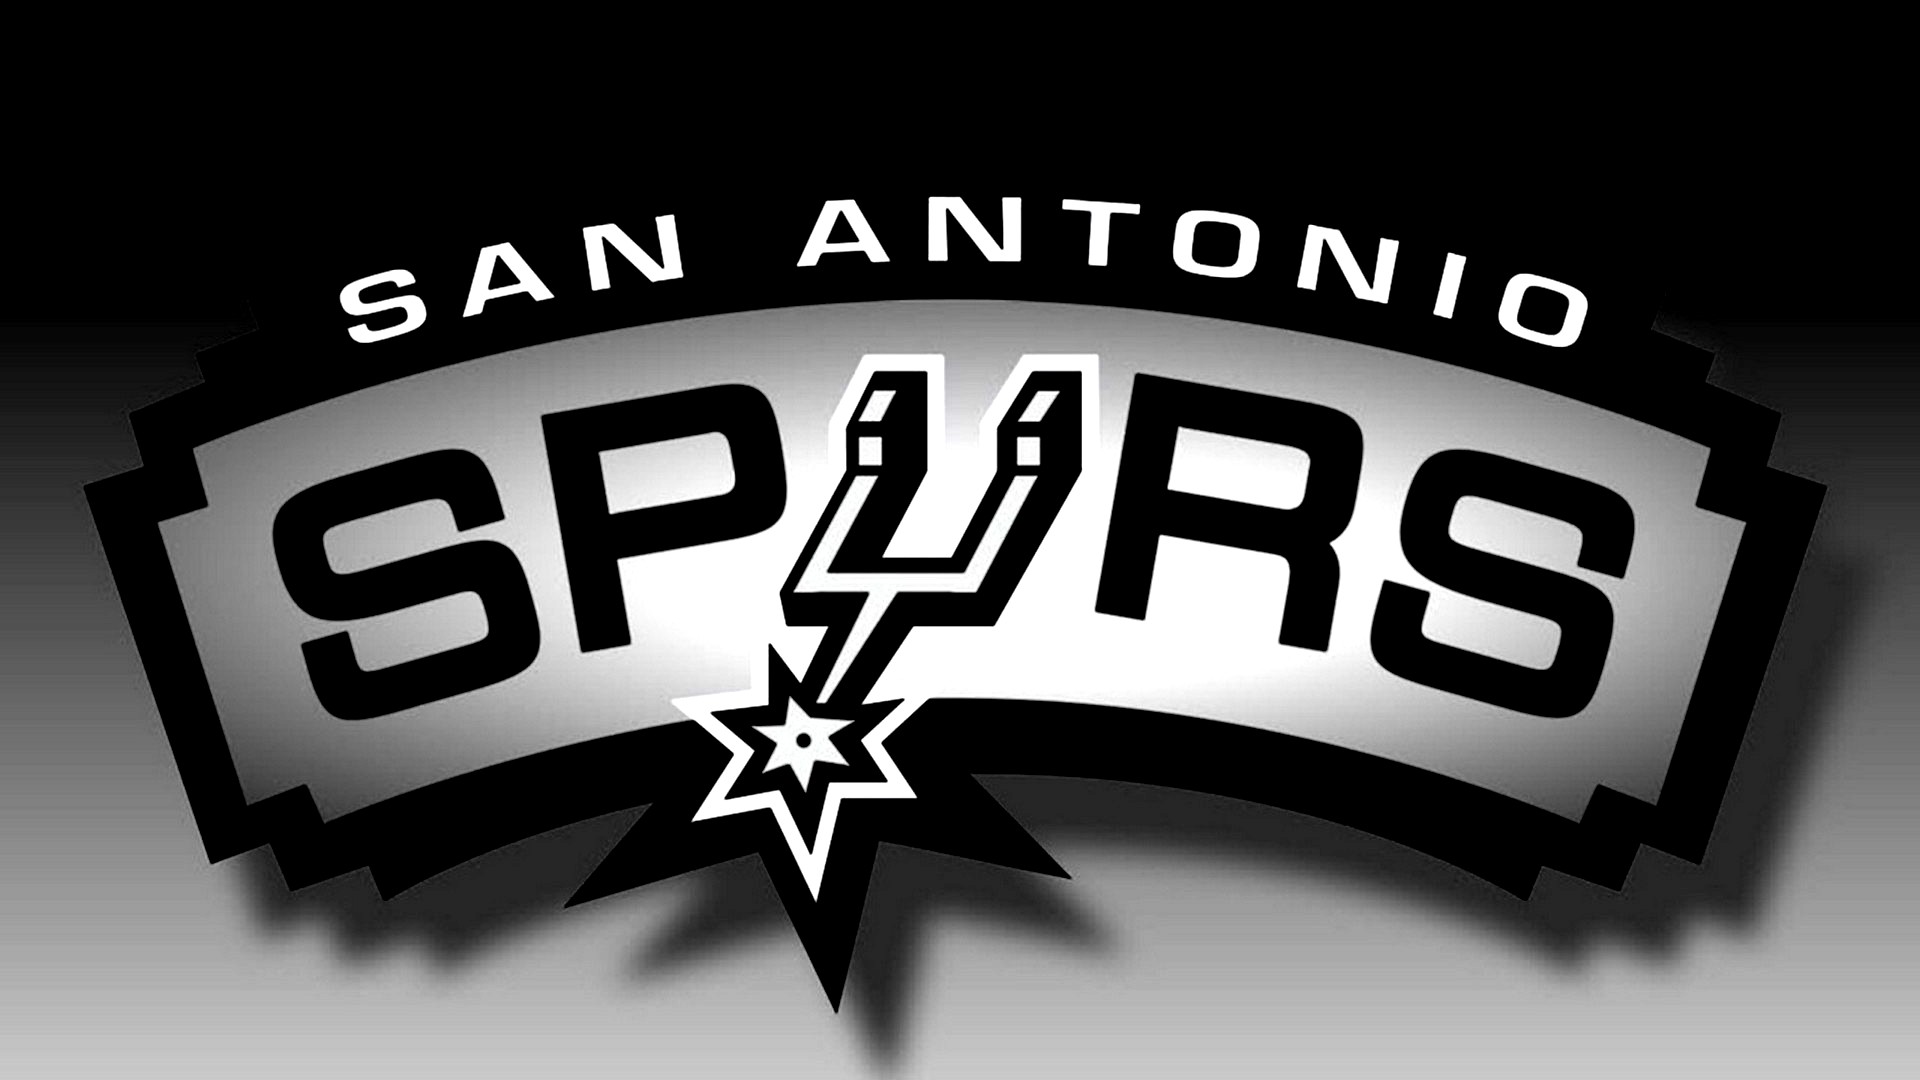 San Antonio Spurs Logo Wallpaper with high-resolution 1920x1080 pixel. You can use this wallpaper for your Desktop Computer Backgrounds, Windows or Mac Screensavers, iPhone Lock screen, Tablet or Android and another Mobile Phone device